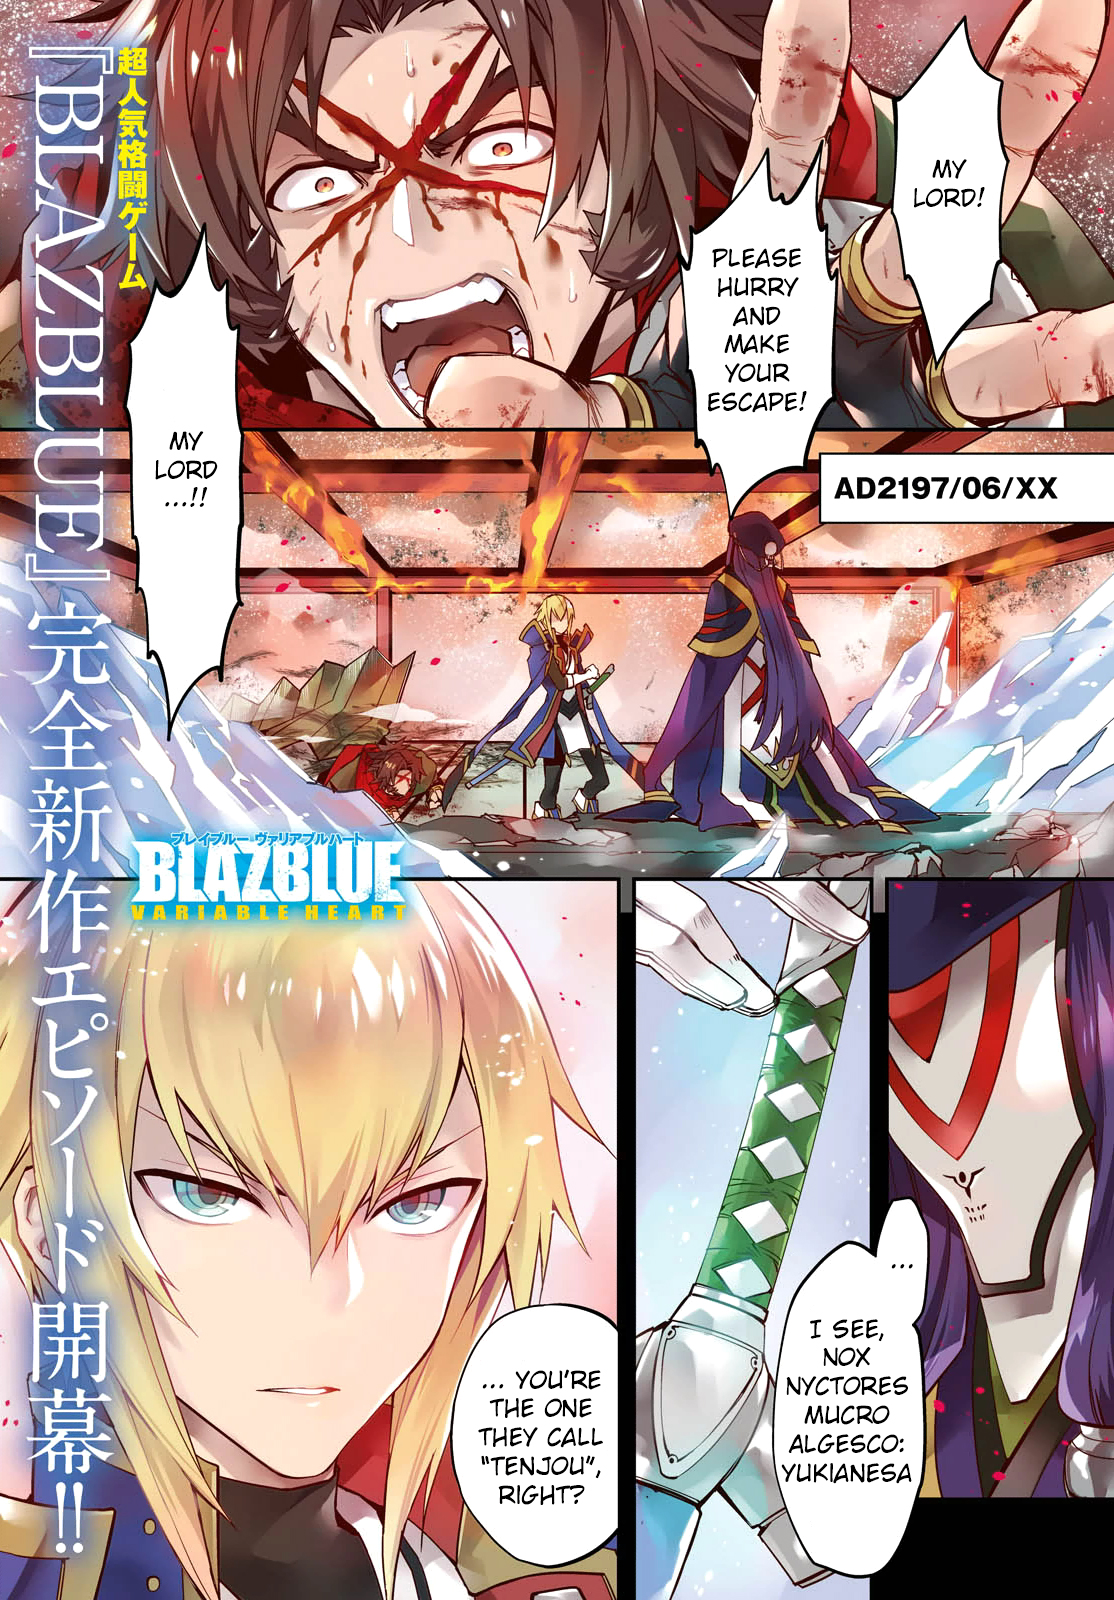 Blazblue - Variable Heart - Page 1